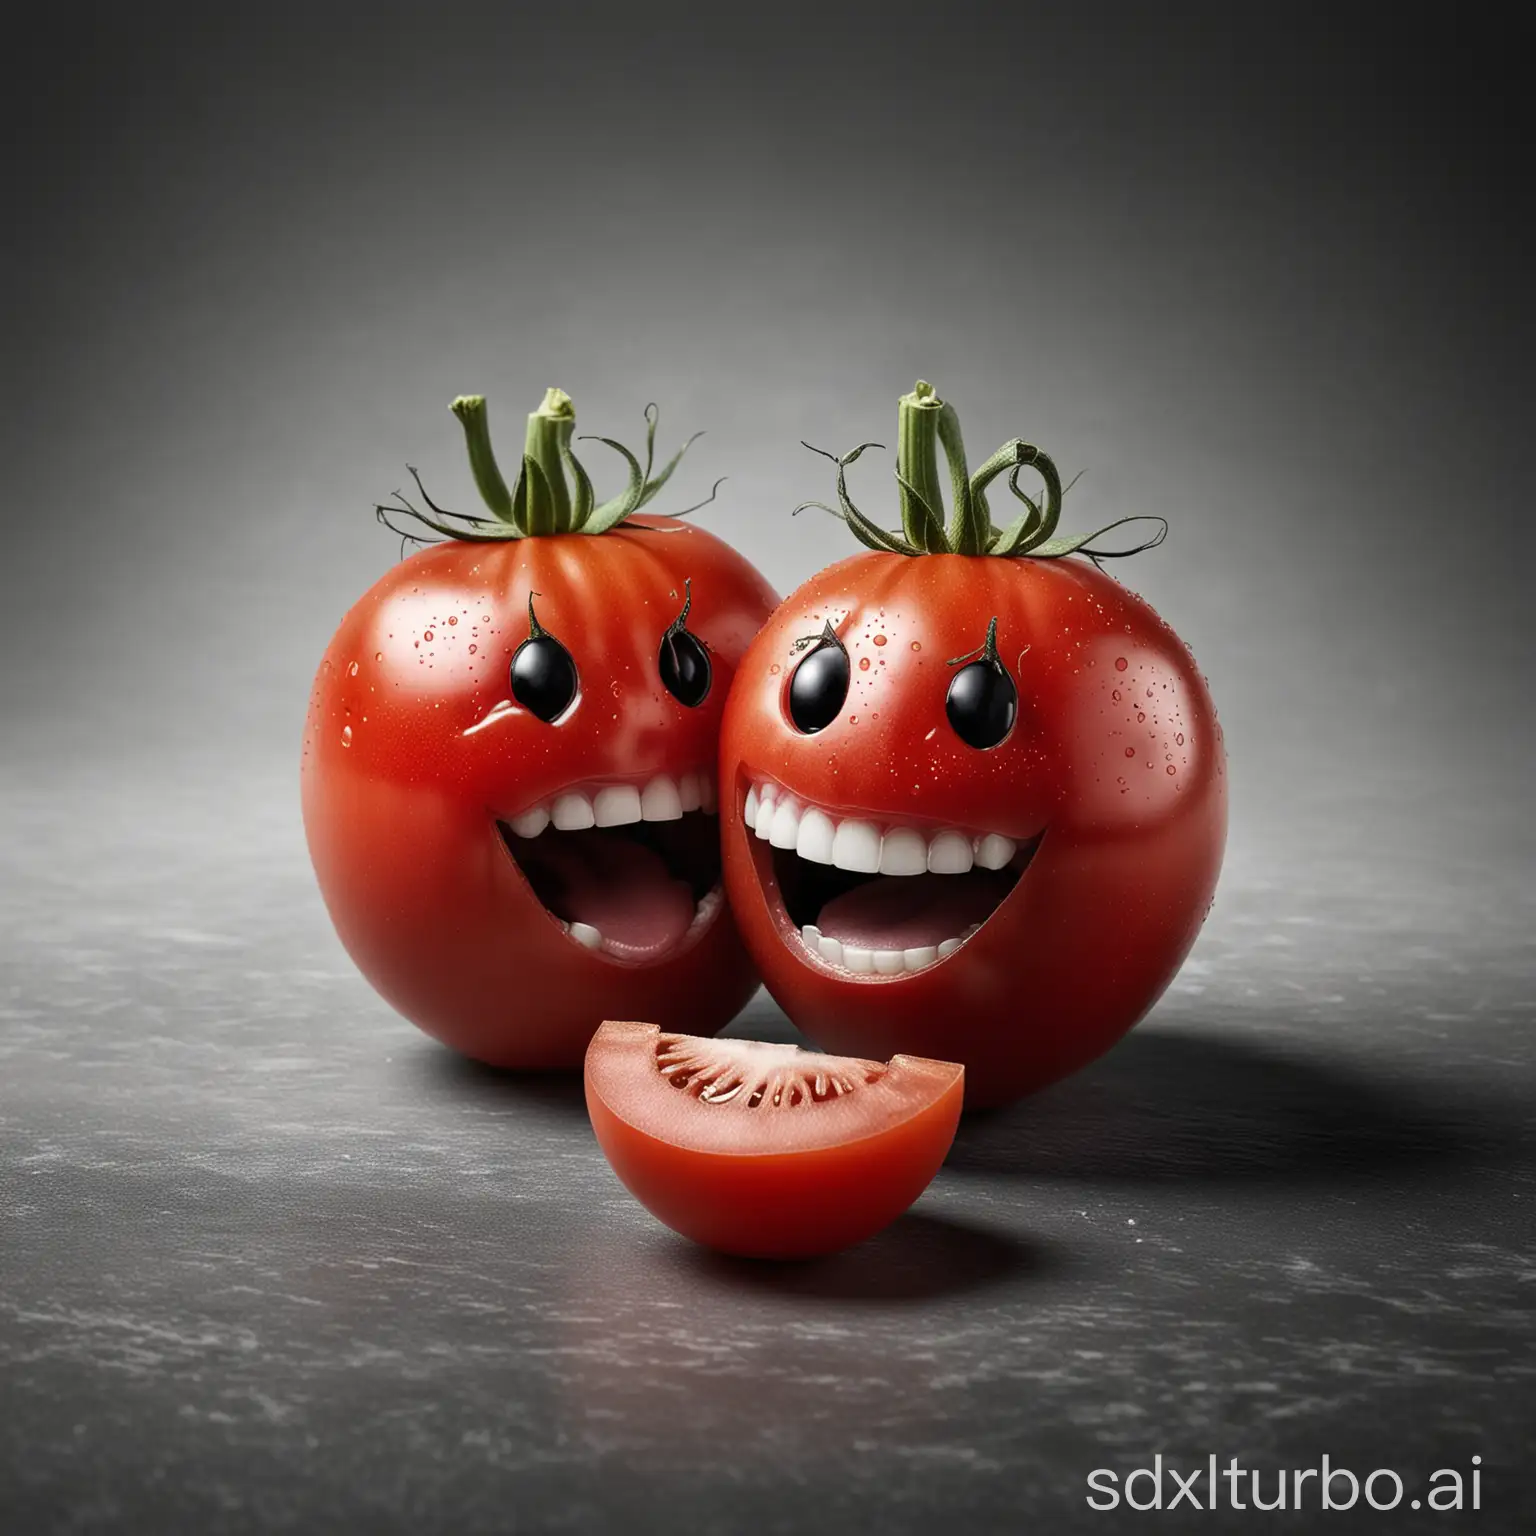 High-resolution photo where 2 red tomatoes with one smiling and one crying face can be seen. The background is a black-and-white gradient.